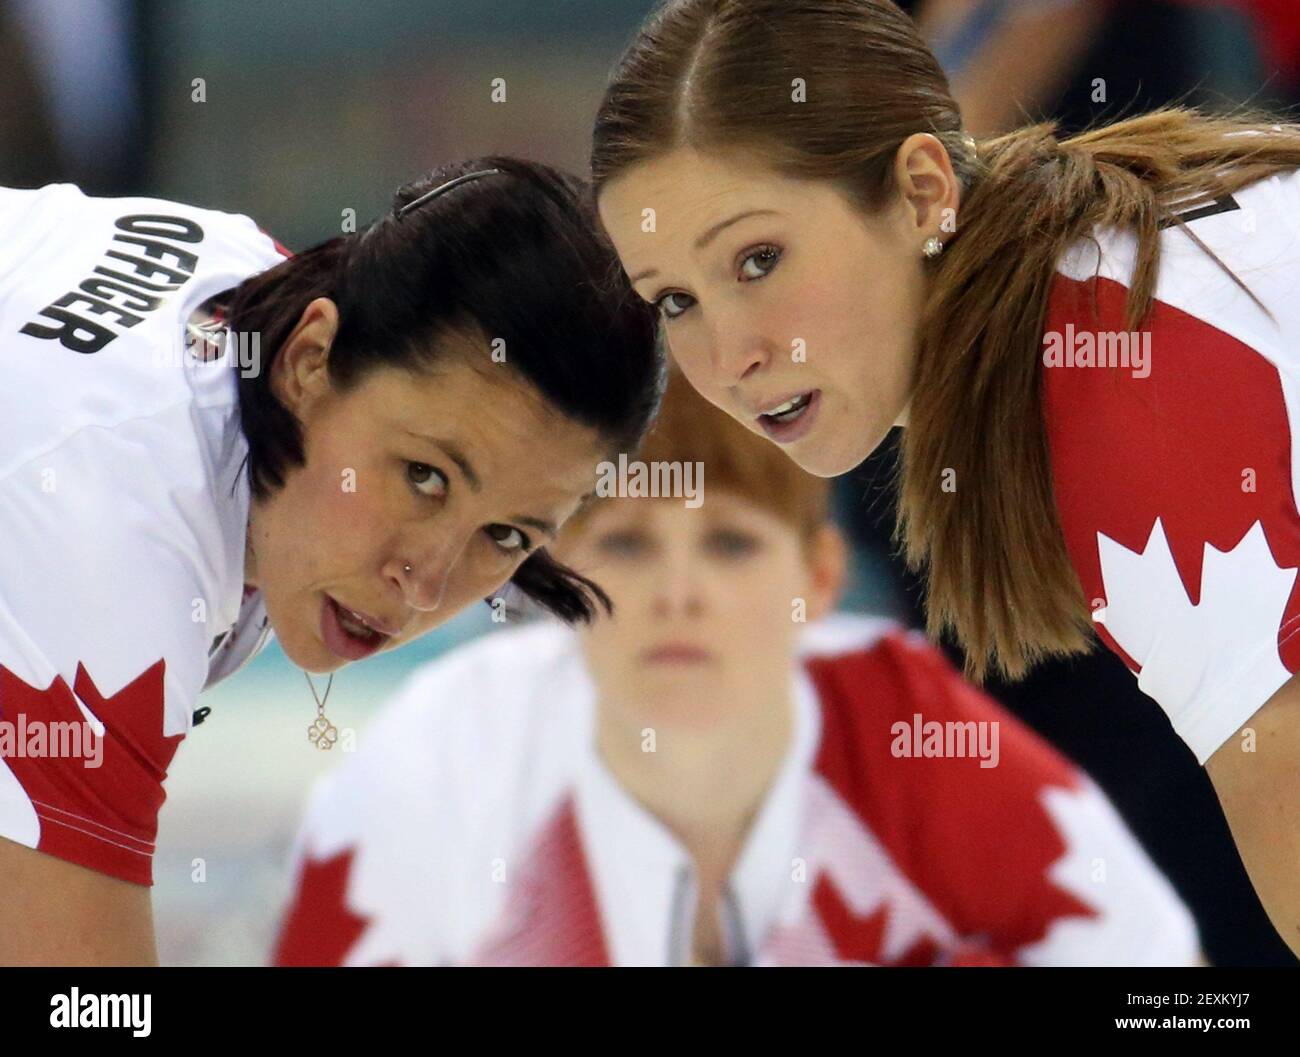 Canada's Jill Officer (left to right), Dawn McEwen and Kaitlyn Lawes watch a throw during their victory over Great Britain in the women's curling semifinals at the Ice Cube Curling Center during the Winter Olympics in Sochi, Russia, Wednesday, Feb. 19, 2014. (Photo by Brian Cassella/Chicago Tribune/MCT/Sipa USA) Stock Photo